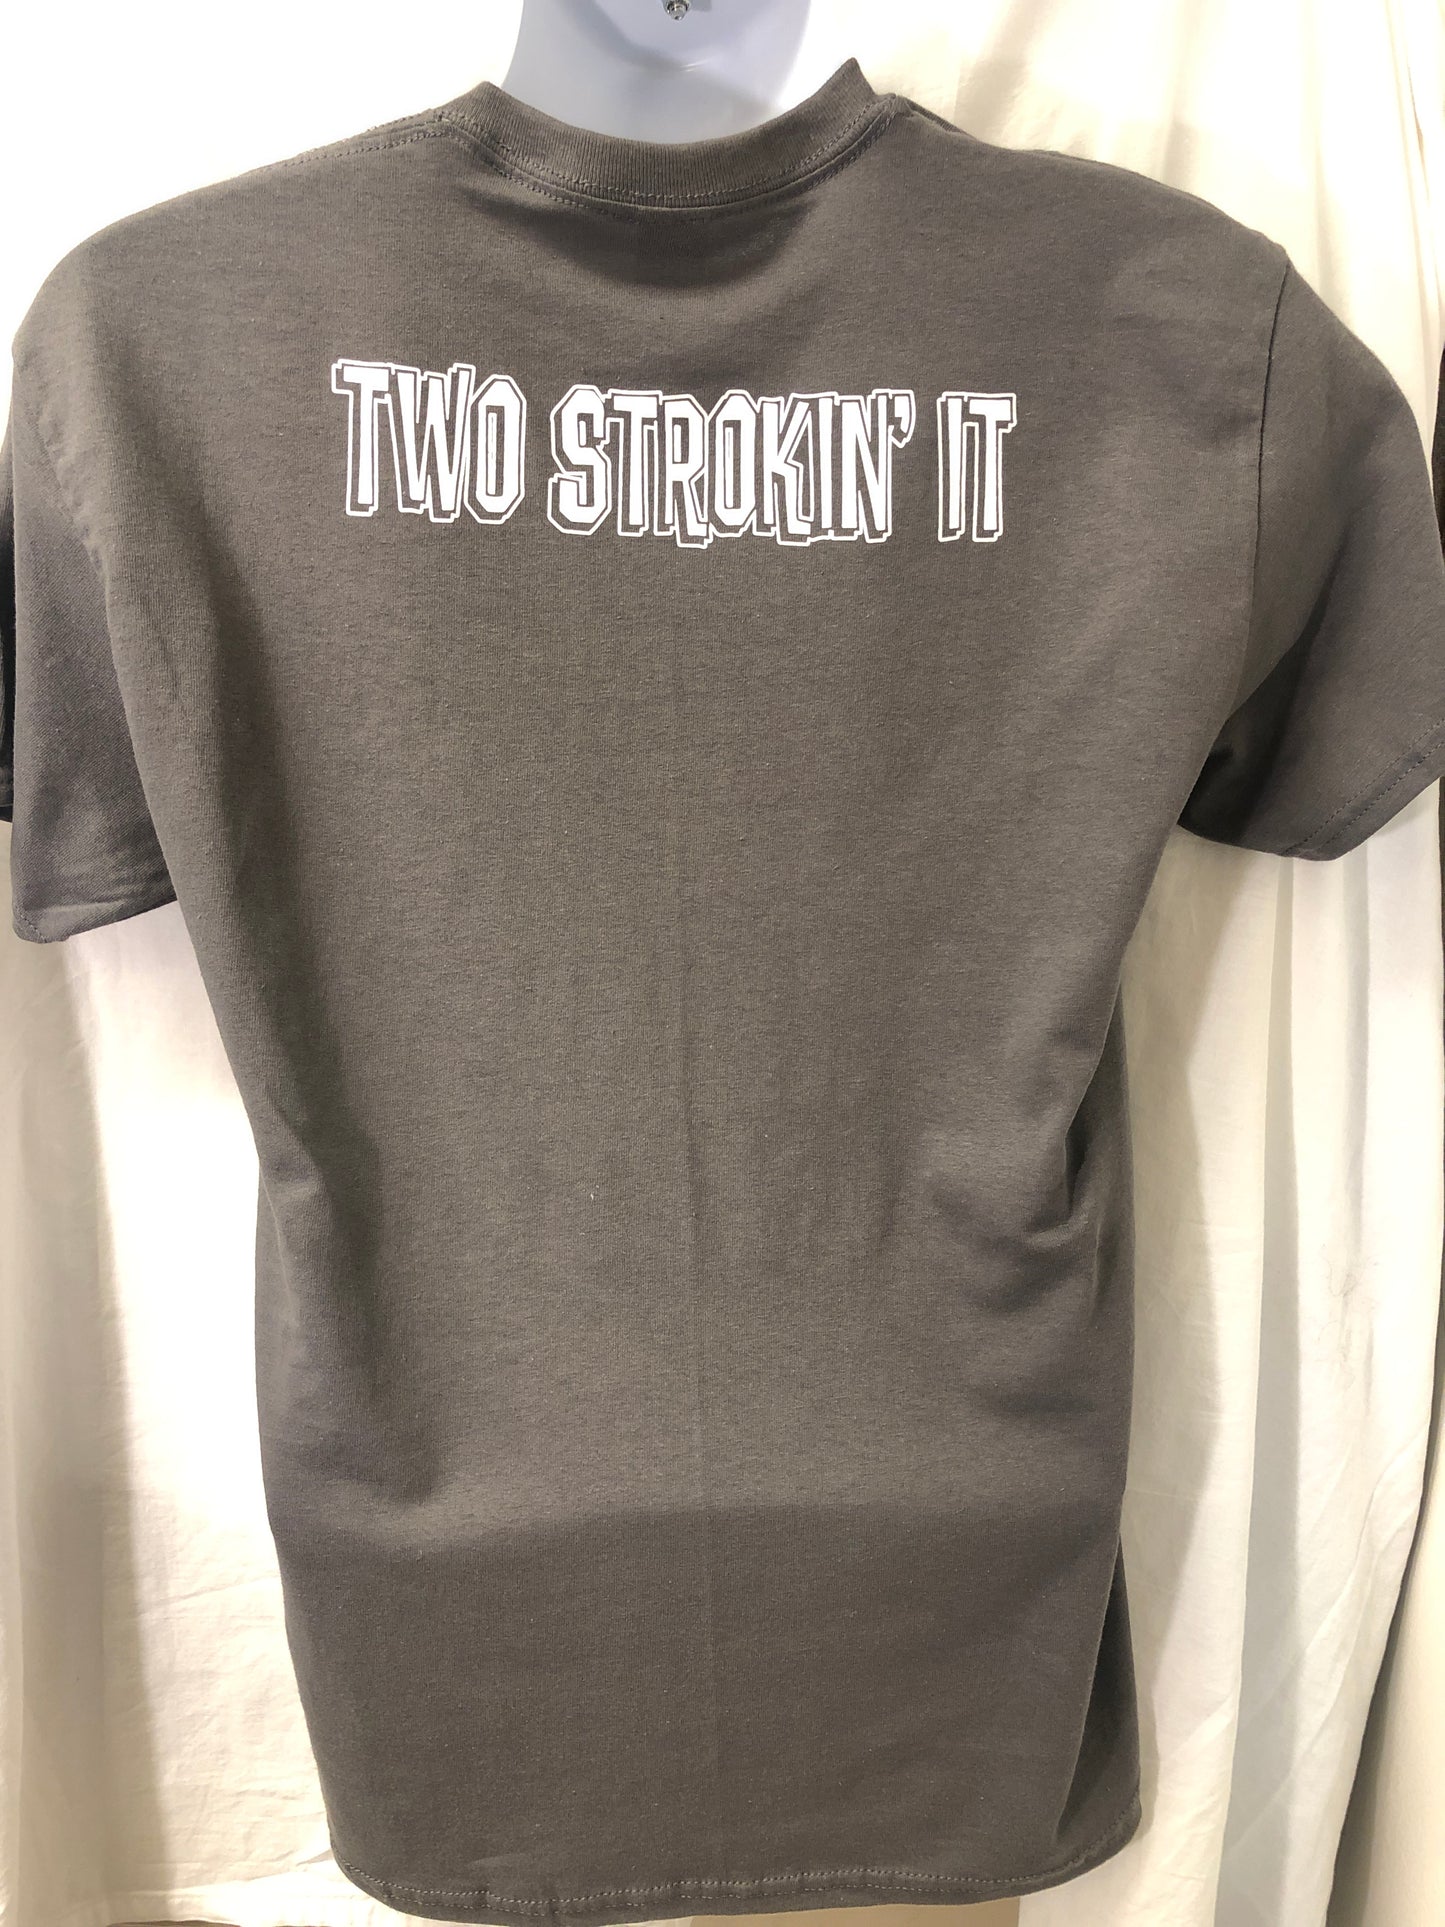 Two Strokin' It - Byrd and Logo Short Sleeve T-shirt